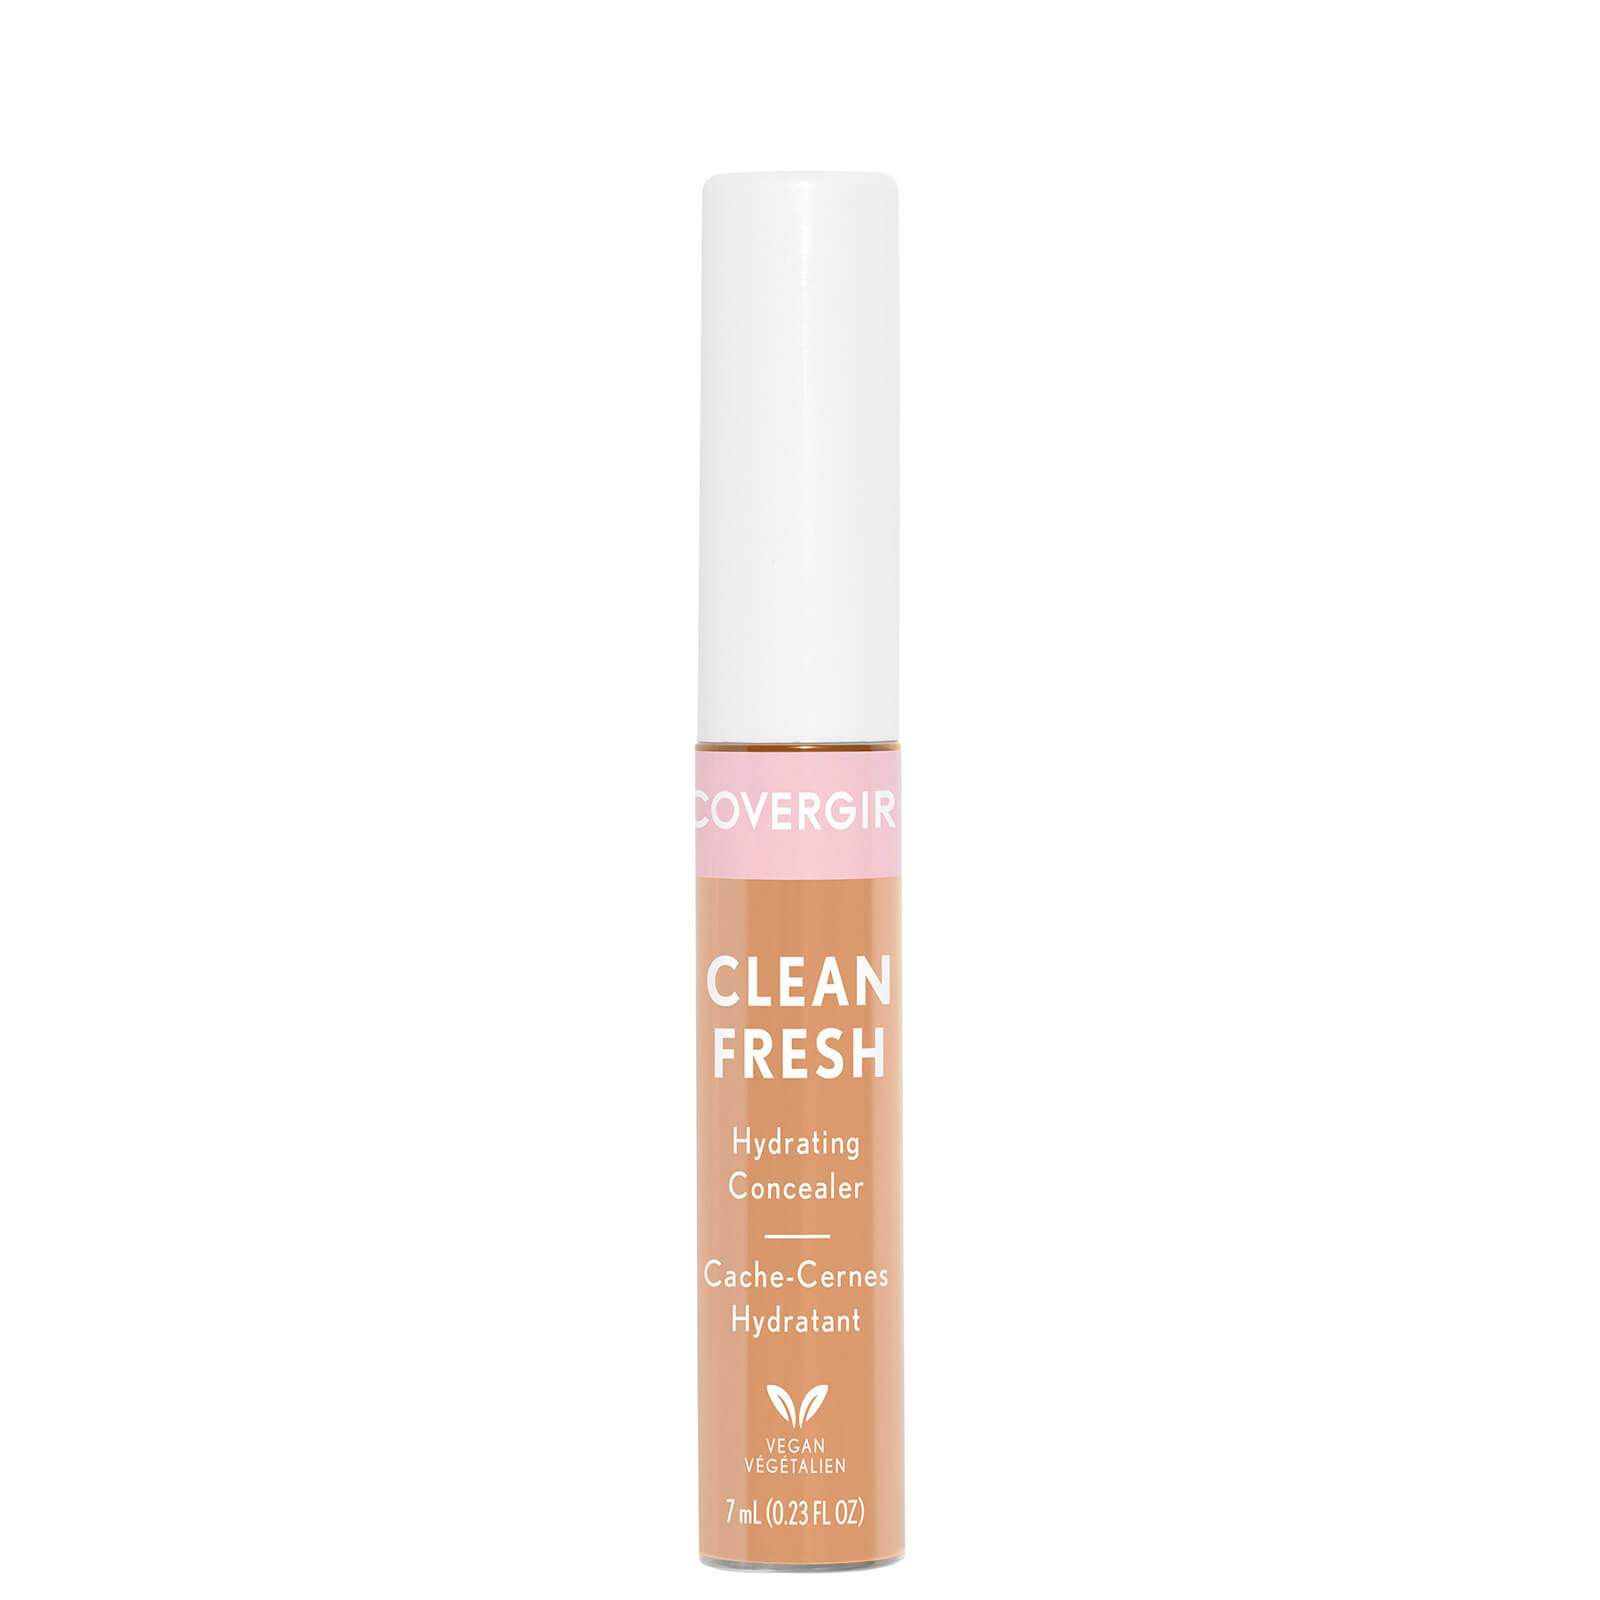 Covergirl Clean Fresh Hydrating Concealer 0.23 oz (Various Shades) - Light